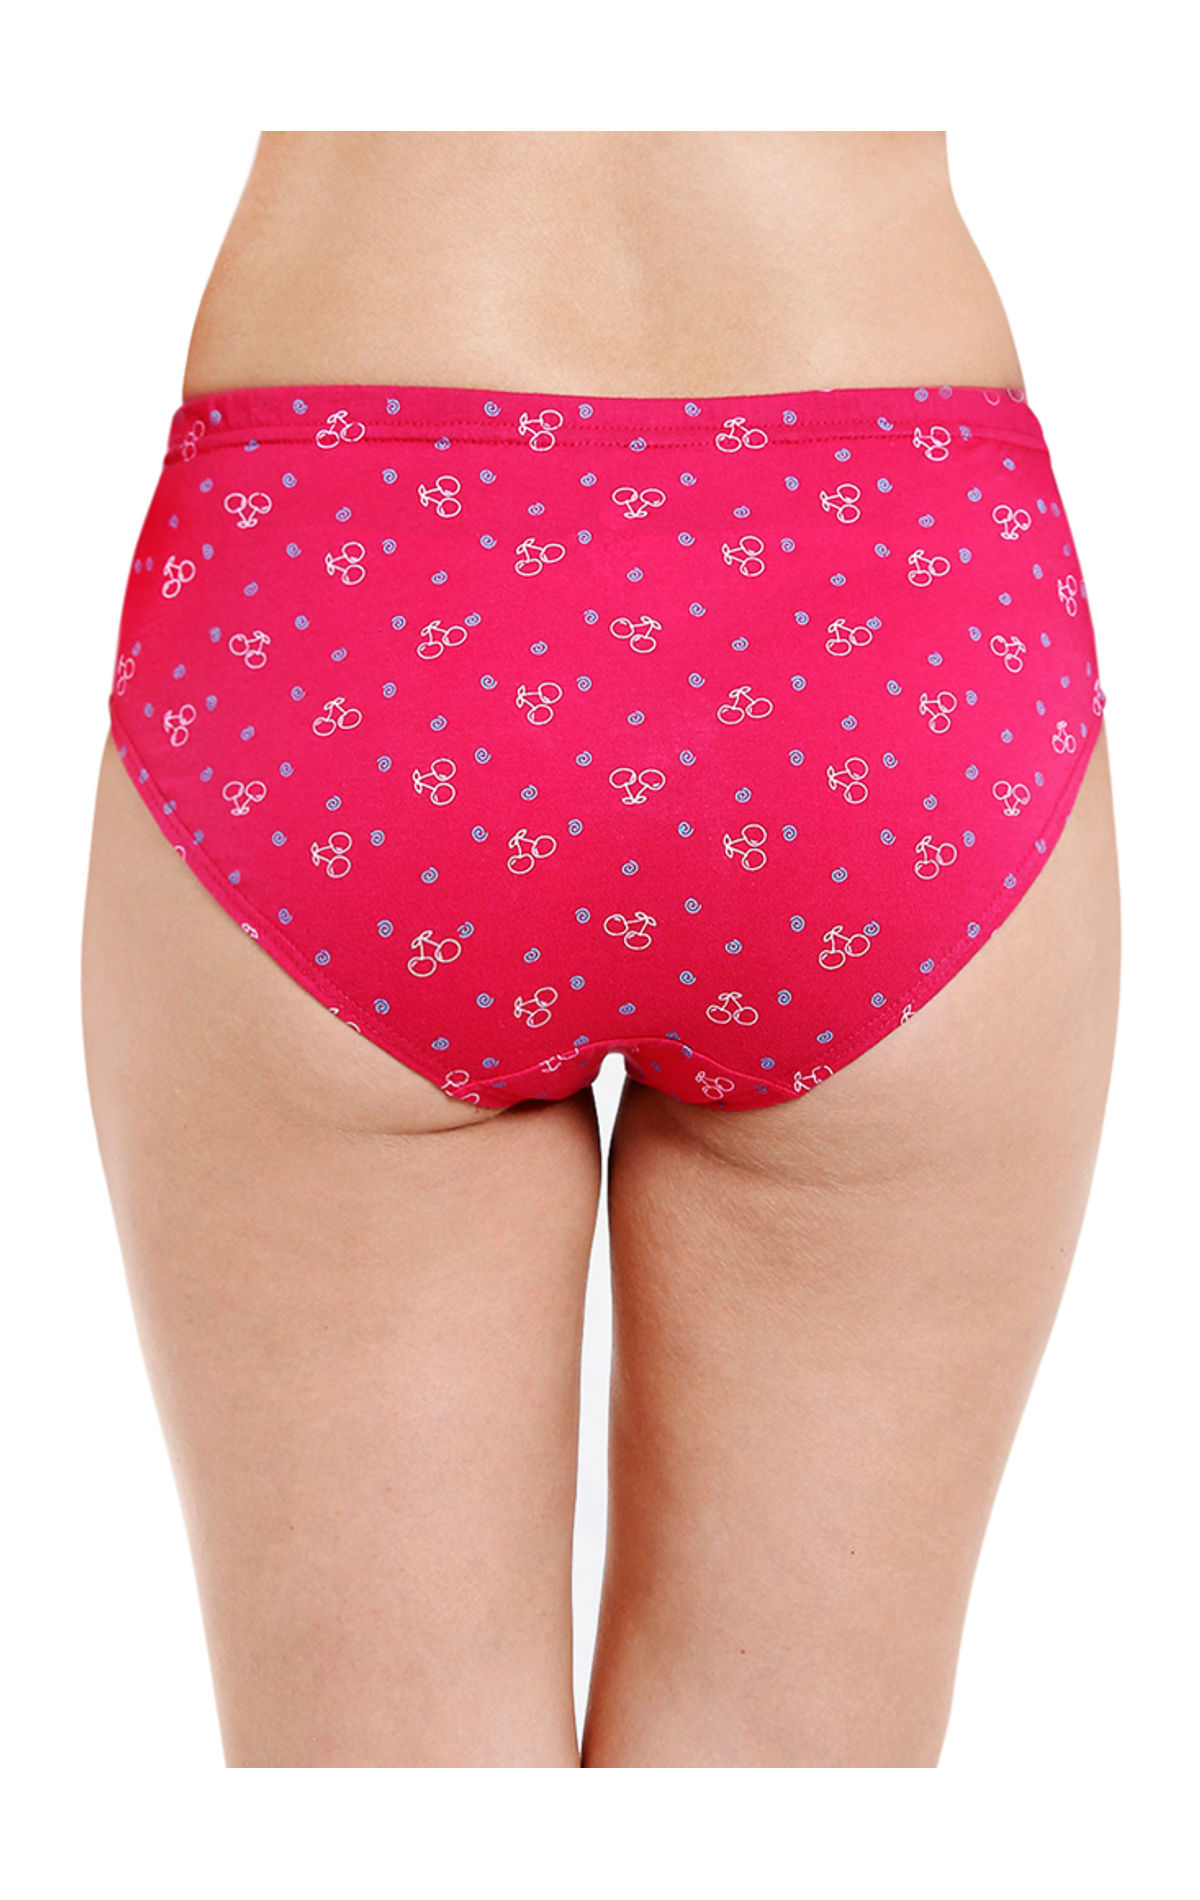 Bodycare Pack Of 3 Premium Printed Hipster Briefs In Assorted Color-6640, 6640-3pcs